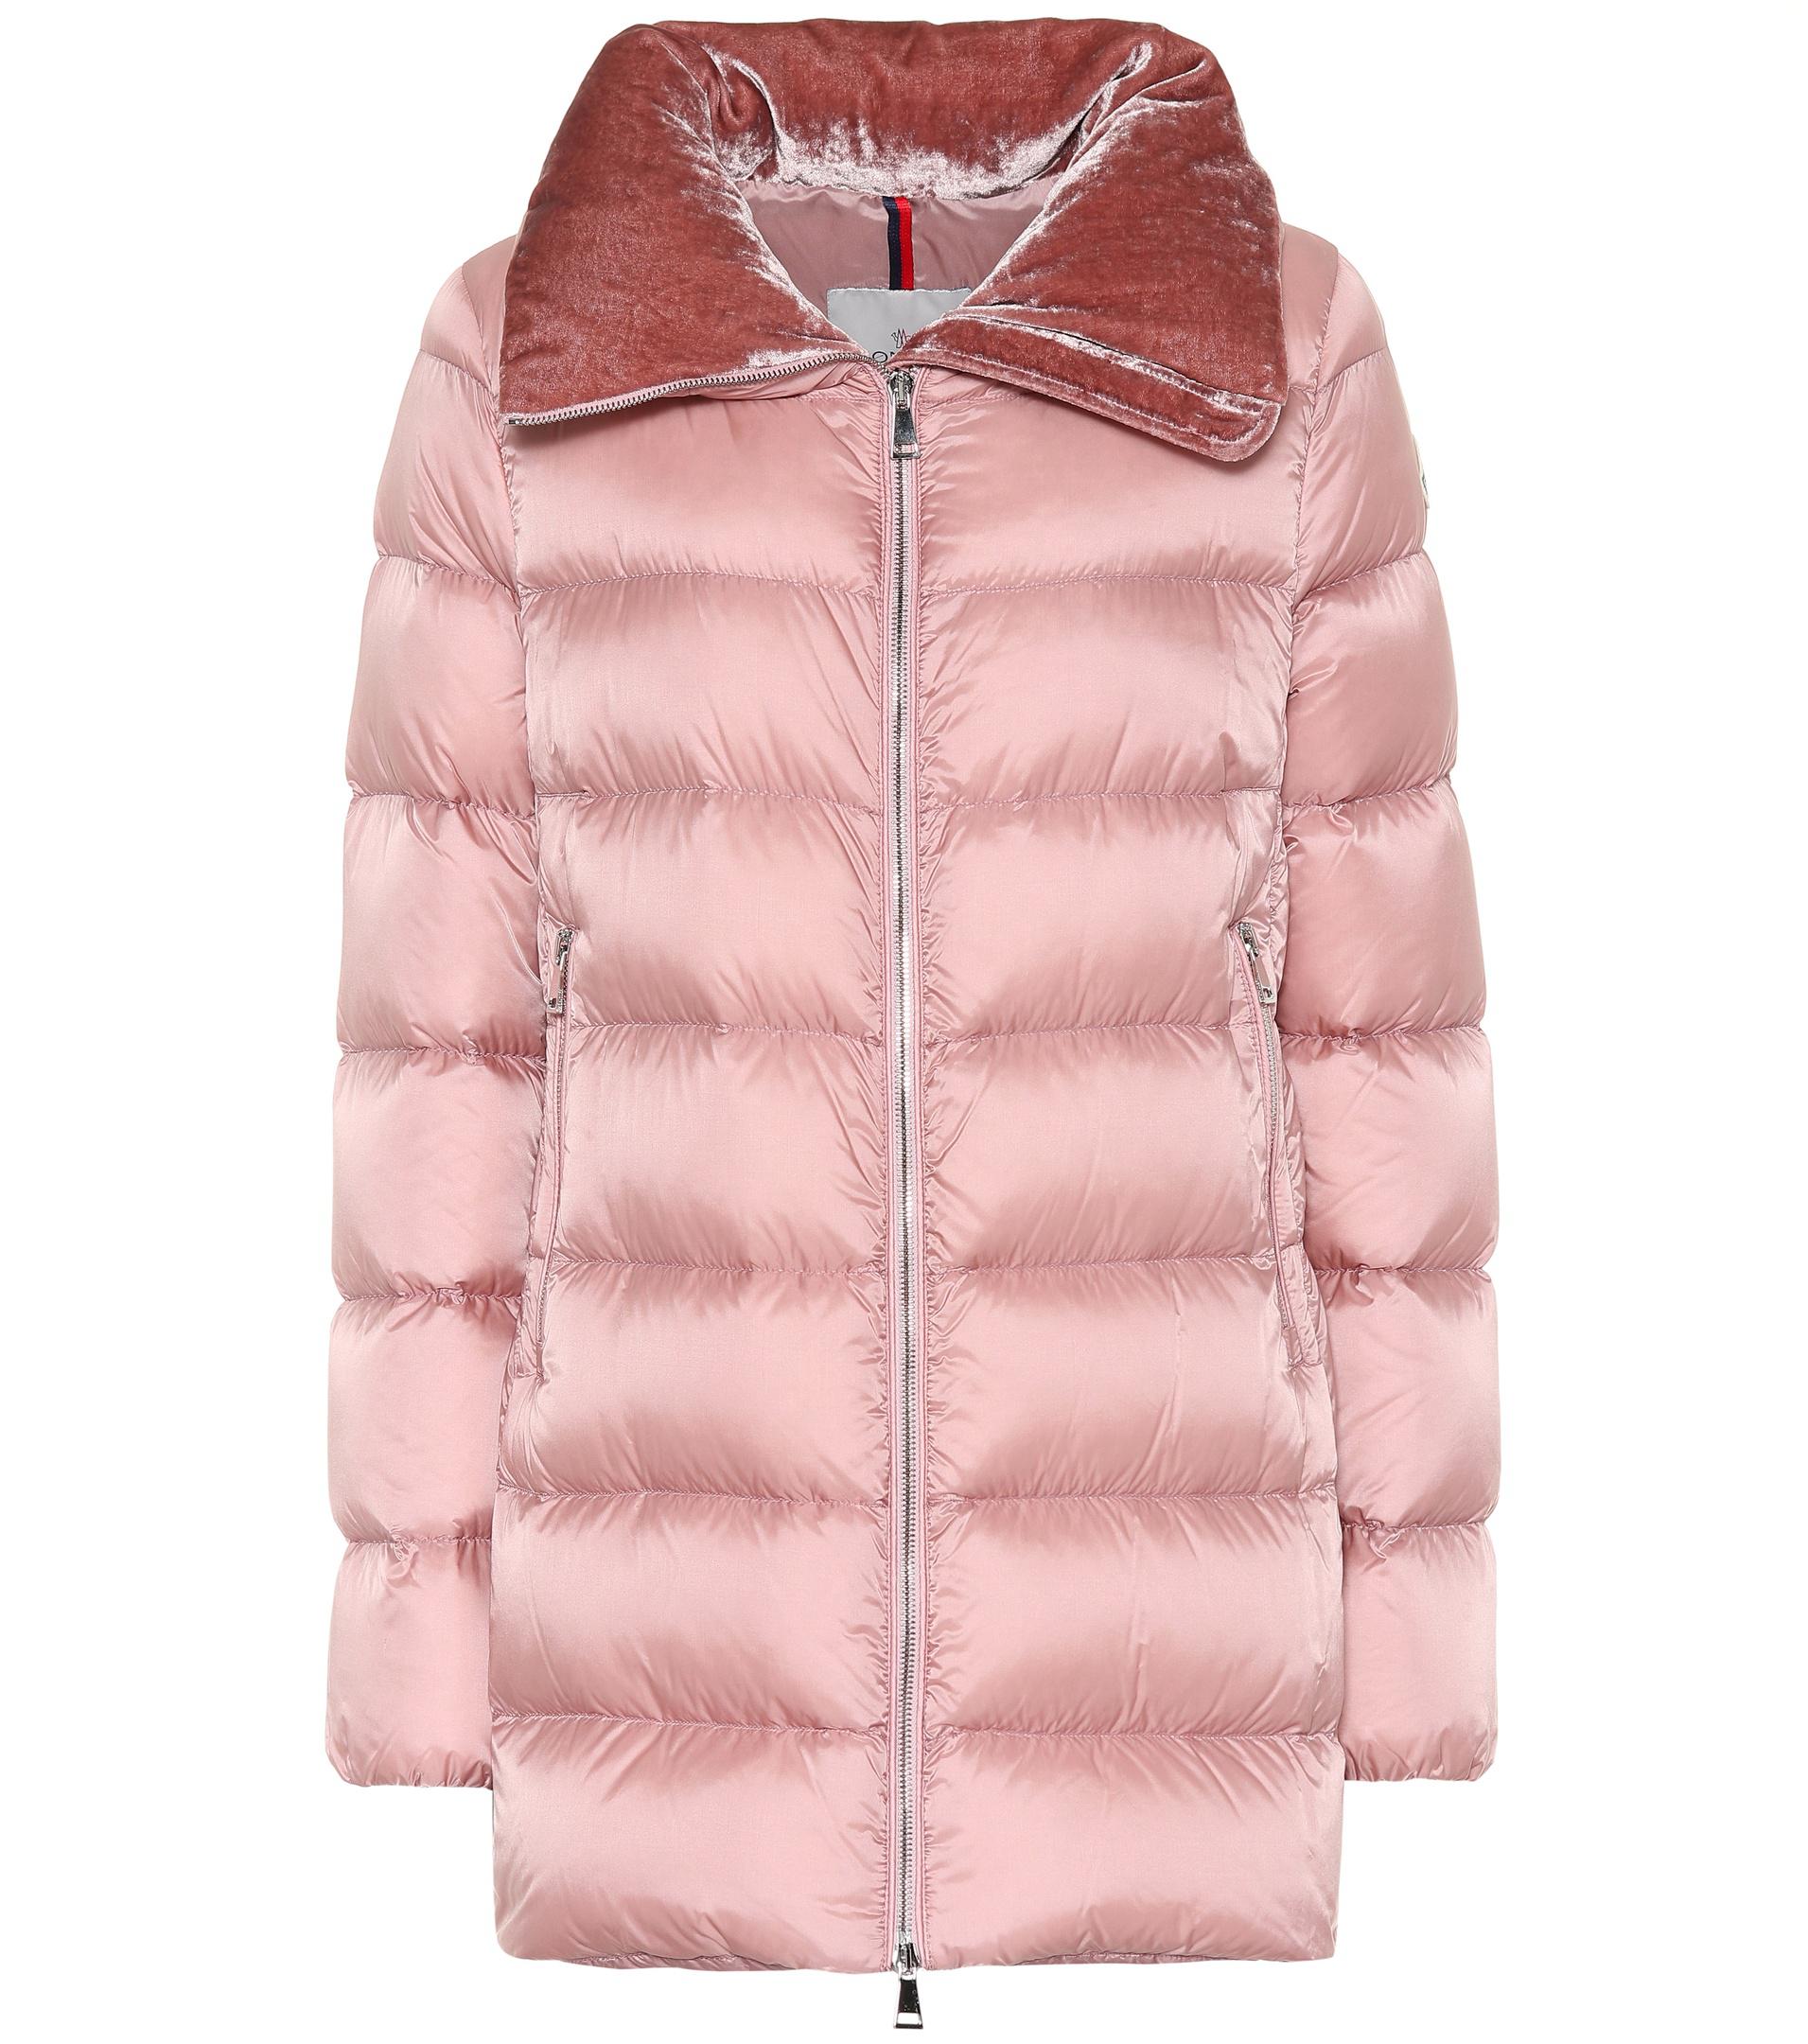 Lyst - Moncler Torcol Down Puffer Jacket in Pink